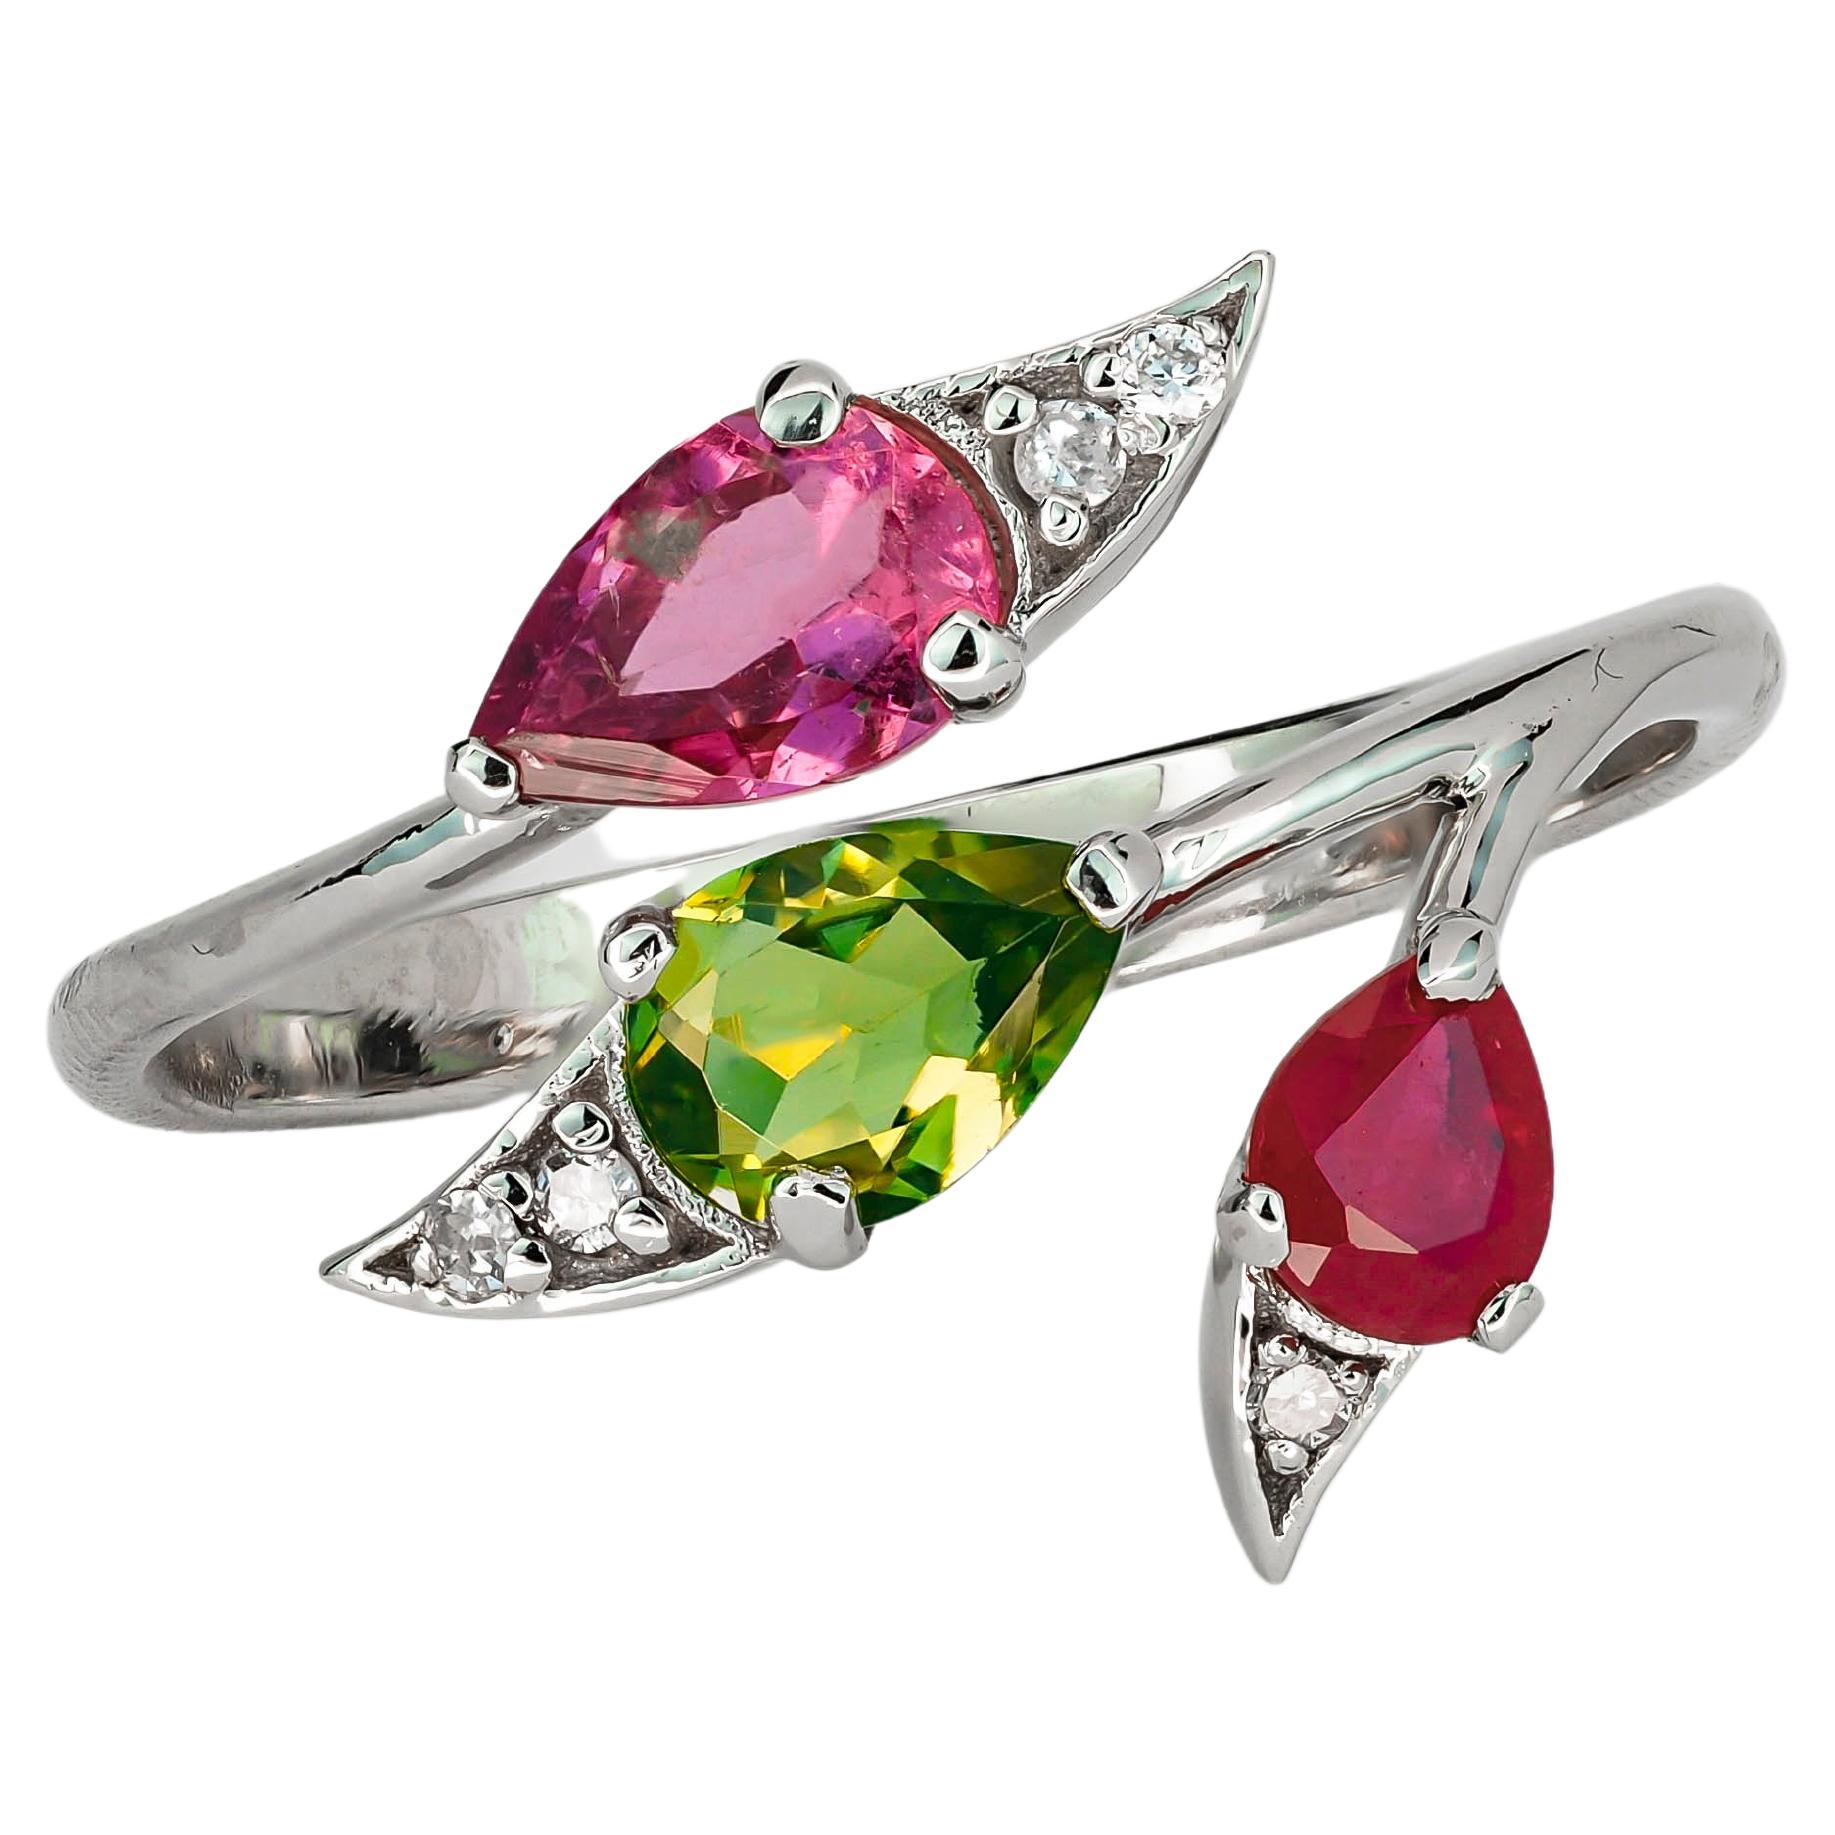 For Sale:  3 gemstone ring. Tourmalines and ruby gold ring. Multicolor gemstones ring.